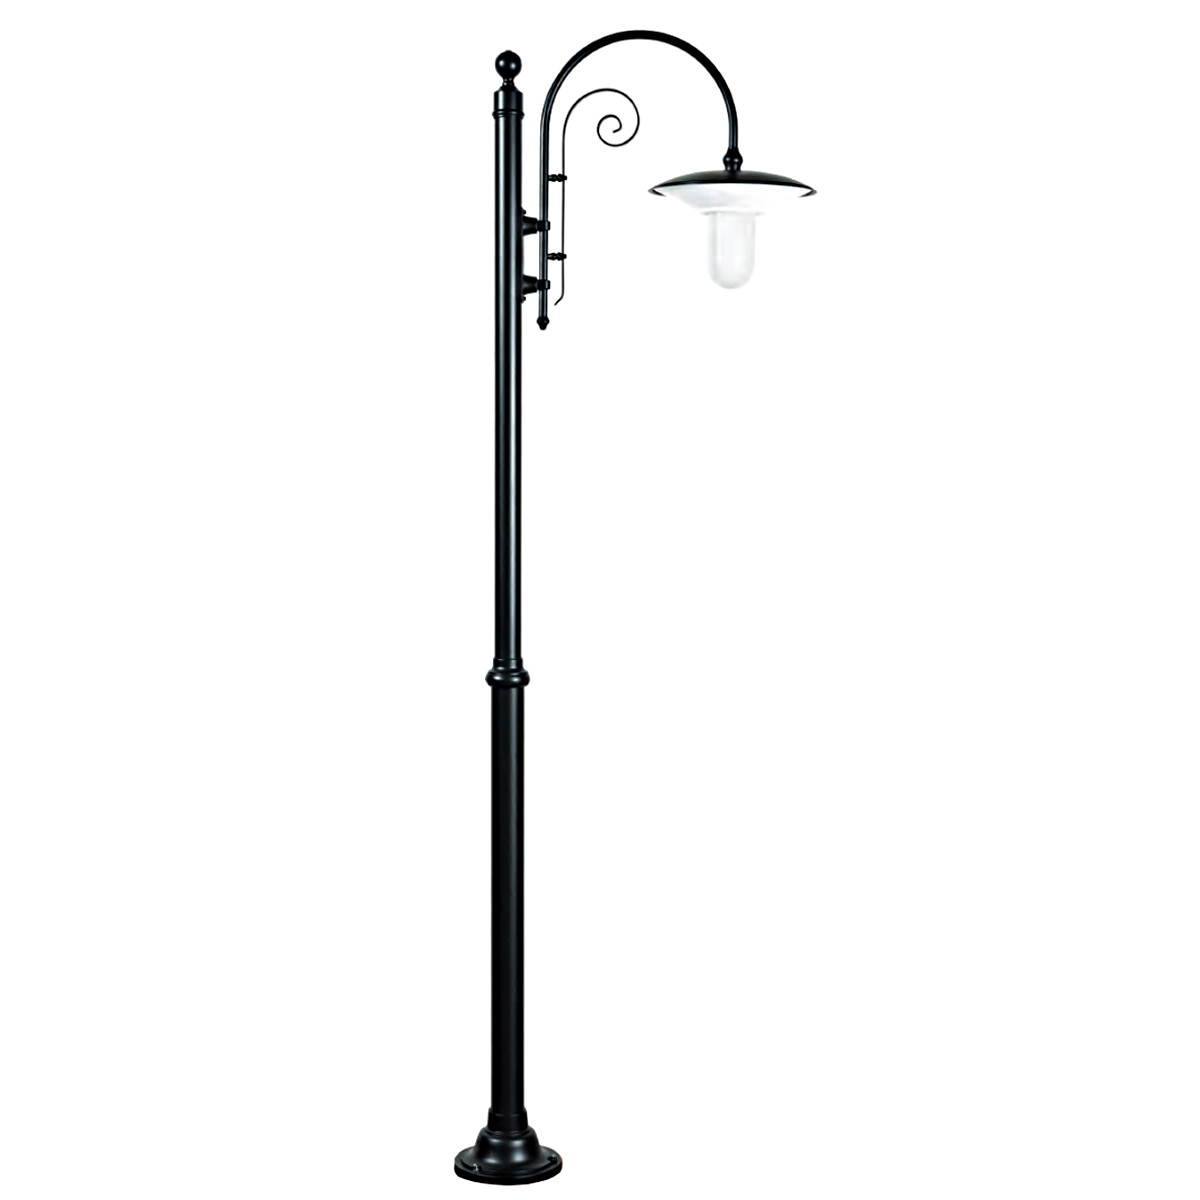 Courtyard Lamp Post with Decorative Curved Arm